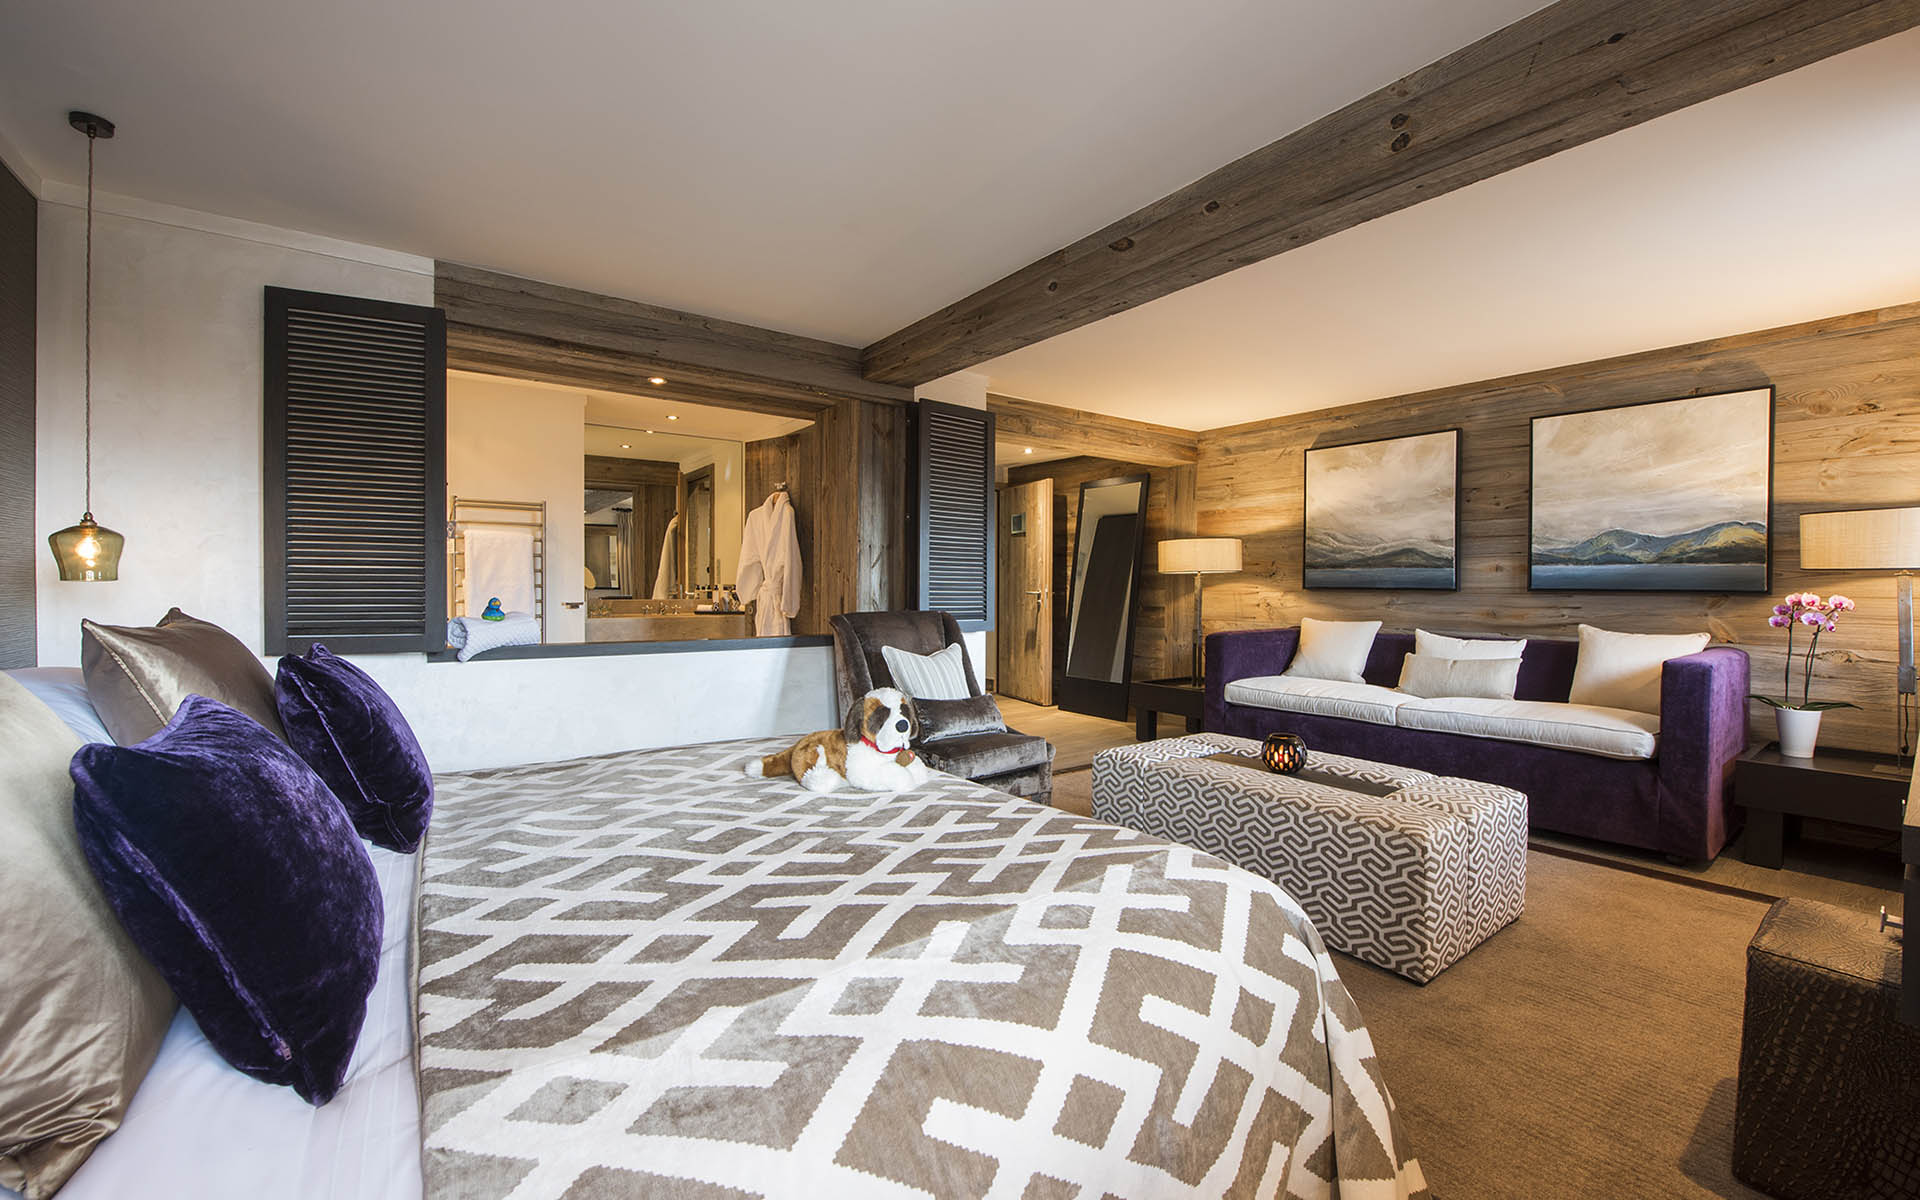 The Lodge, Verbier